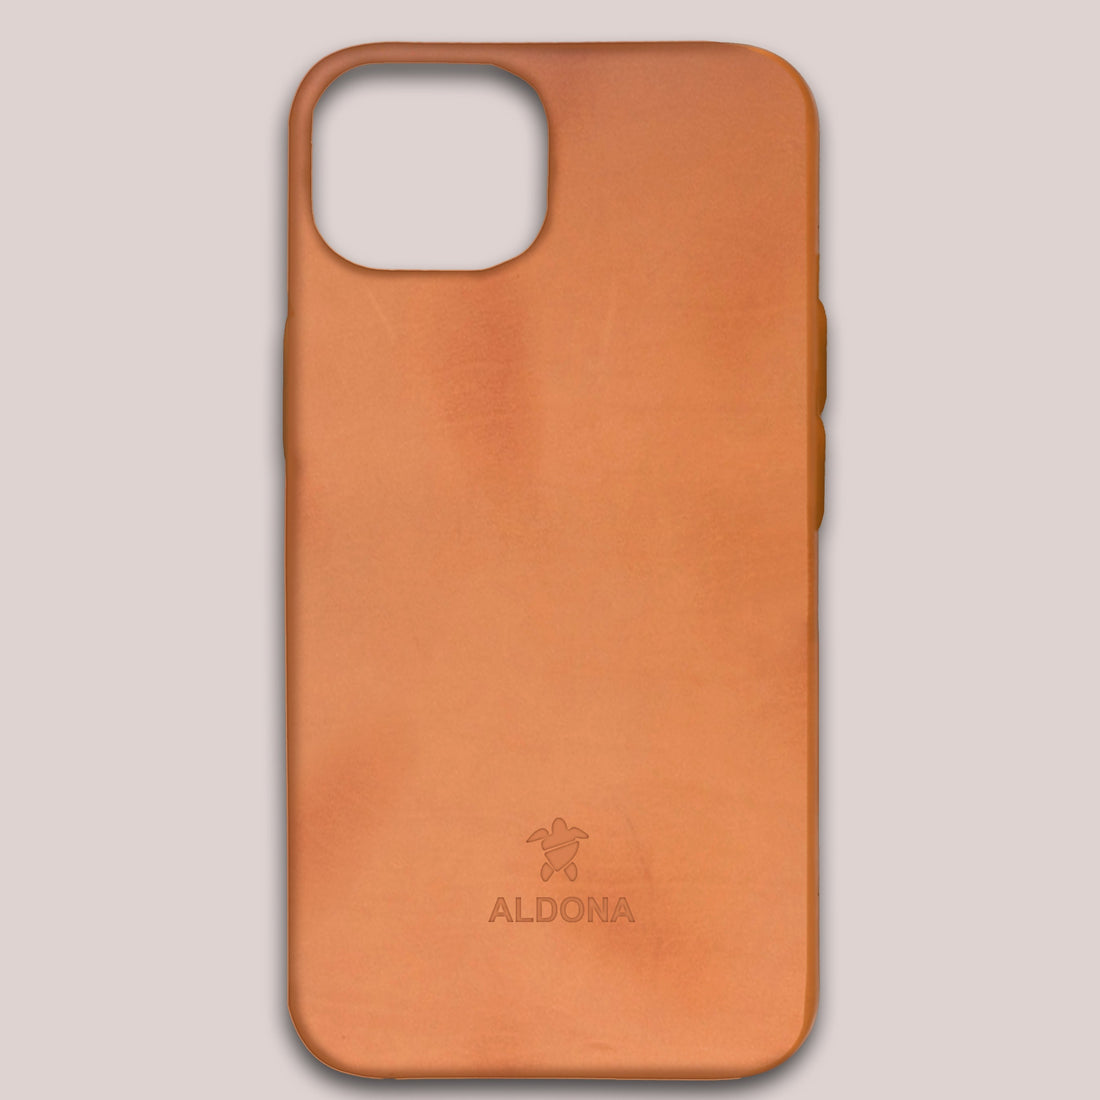 Kalon Case for iPhone 12 Pro with MagSafe Compatibility - Vintage Tan